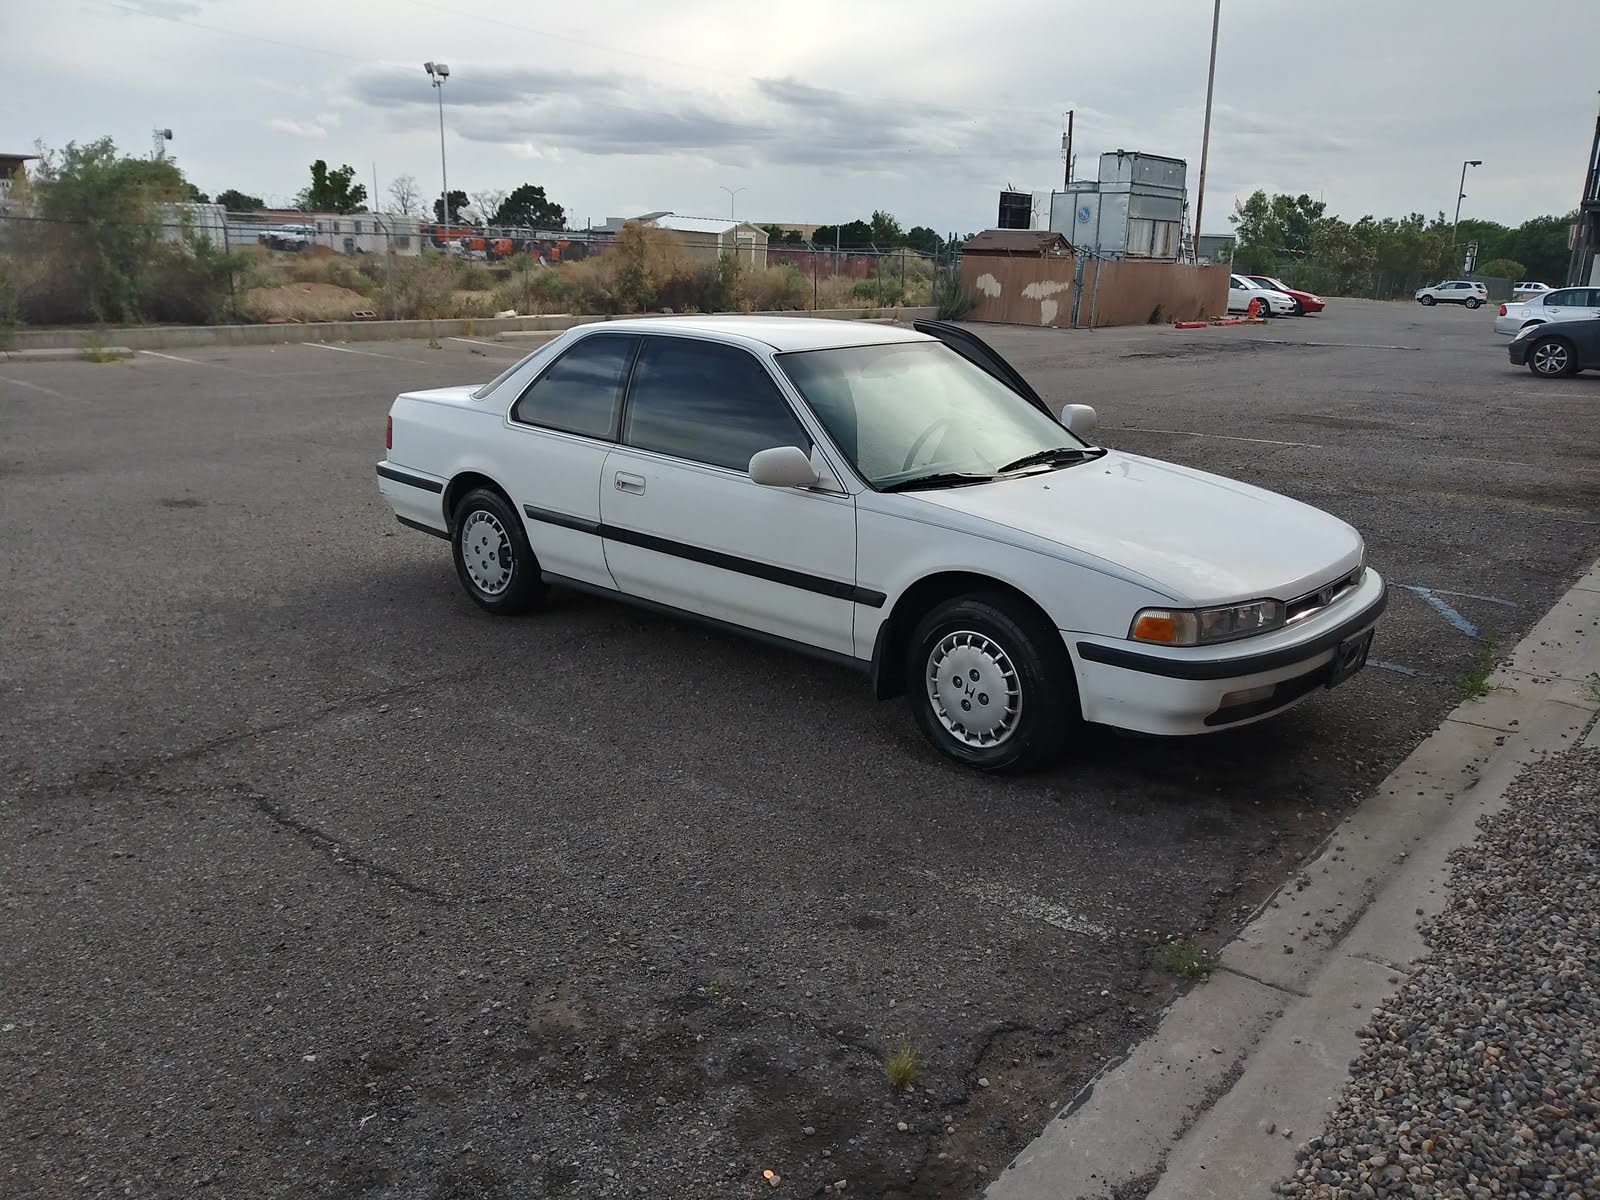 1992 Honda Accord Coupe Test Drive Review - CarGurus